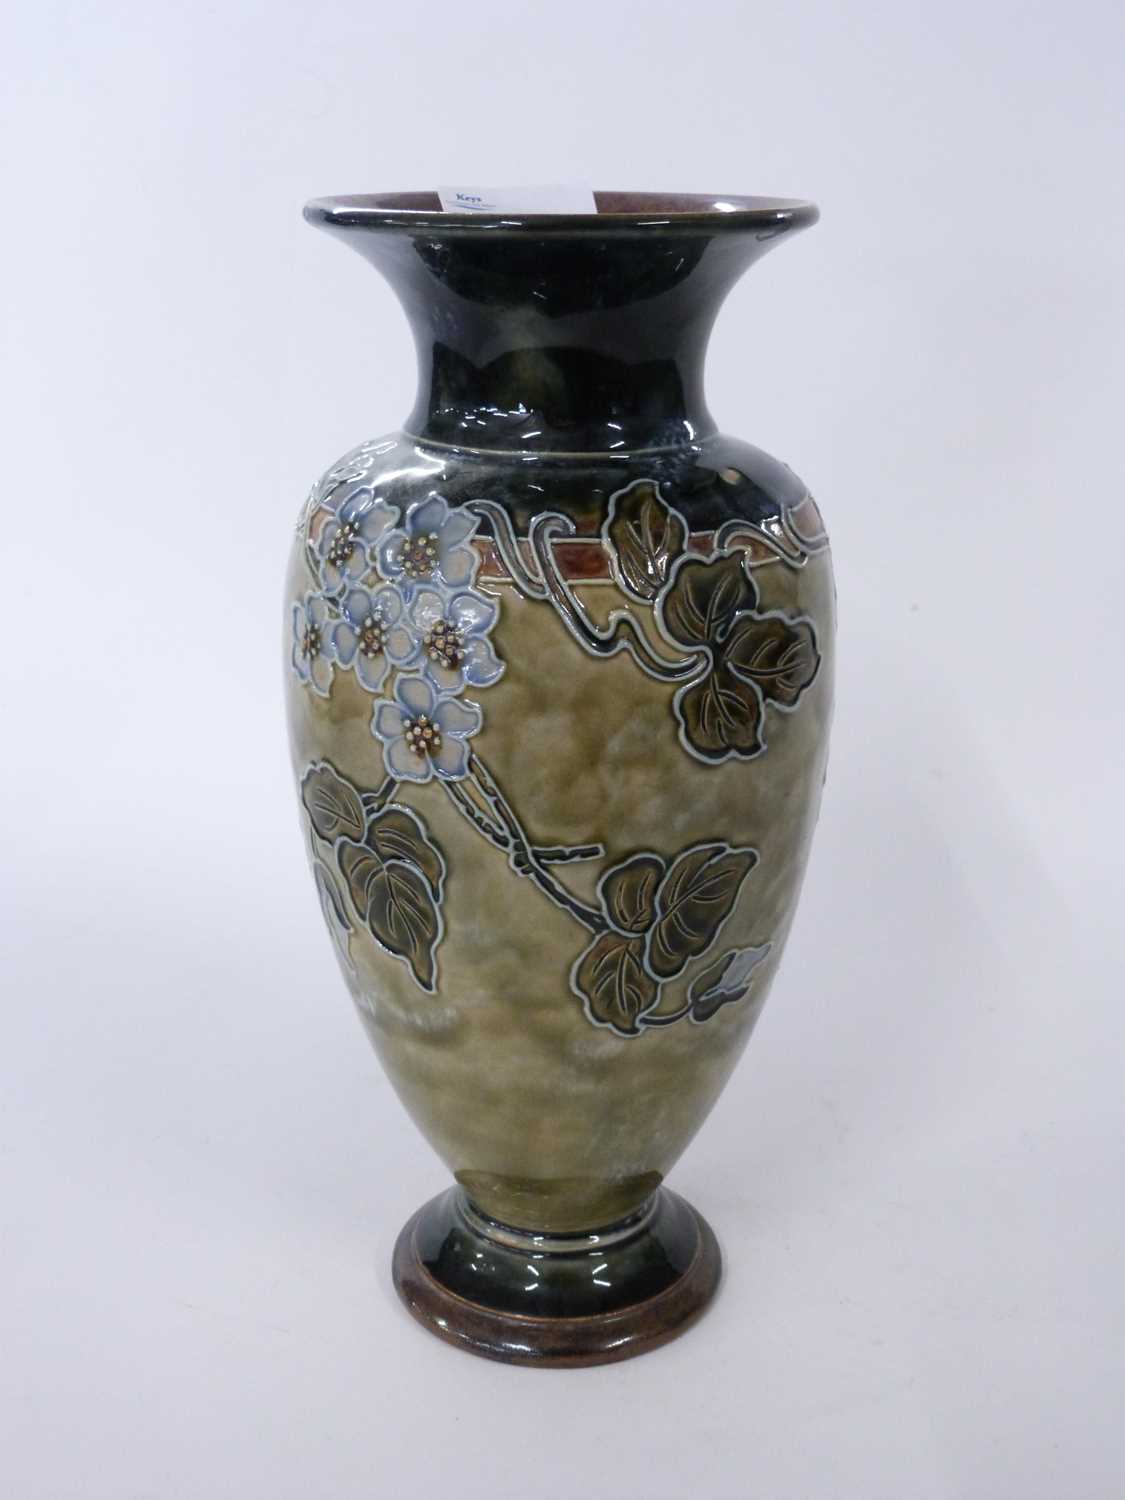 Royal Doulton vase with tubelined design by Florence Roberts, 29cm high